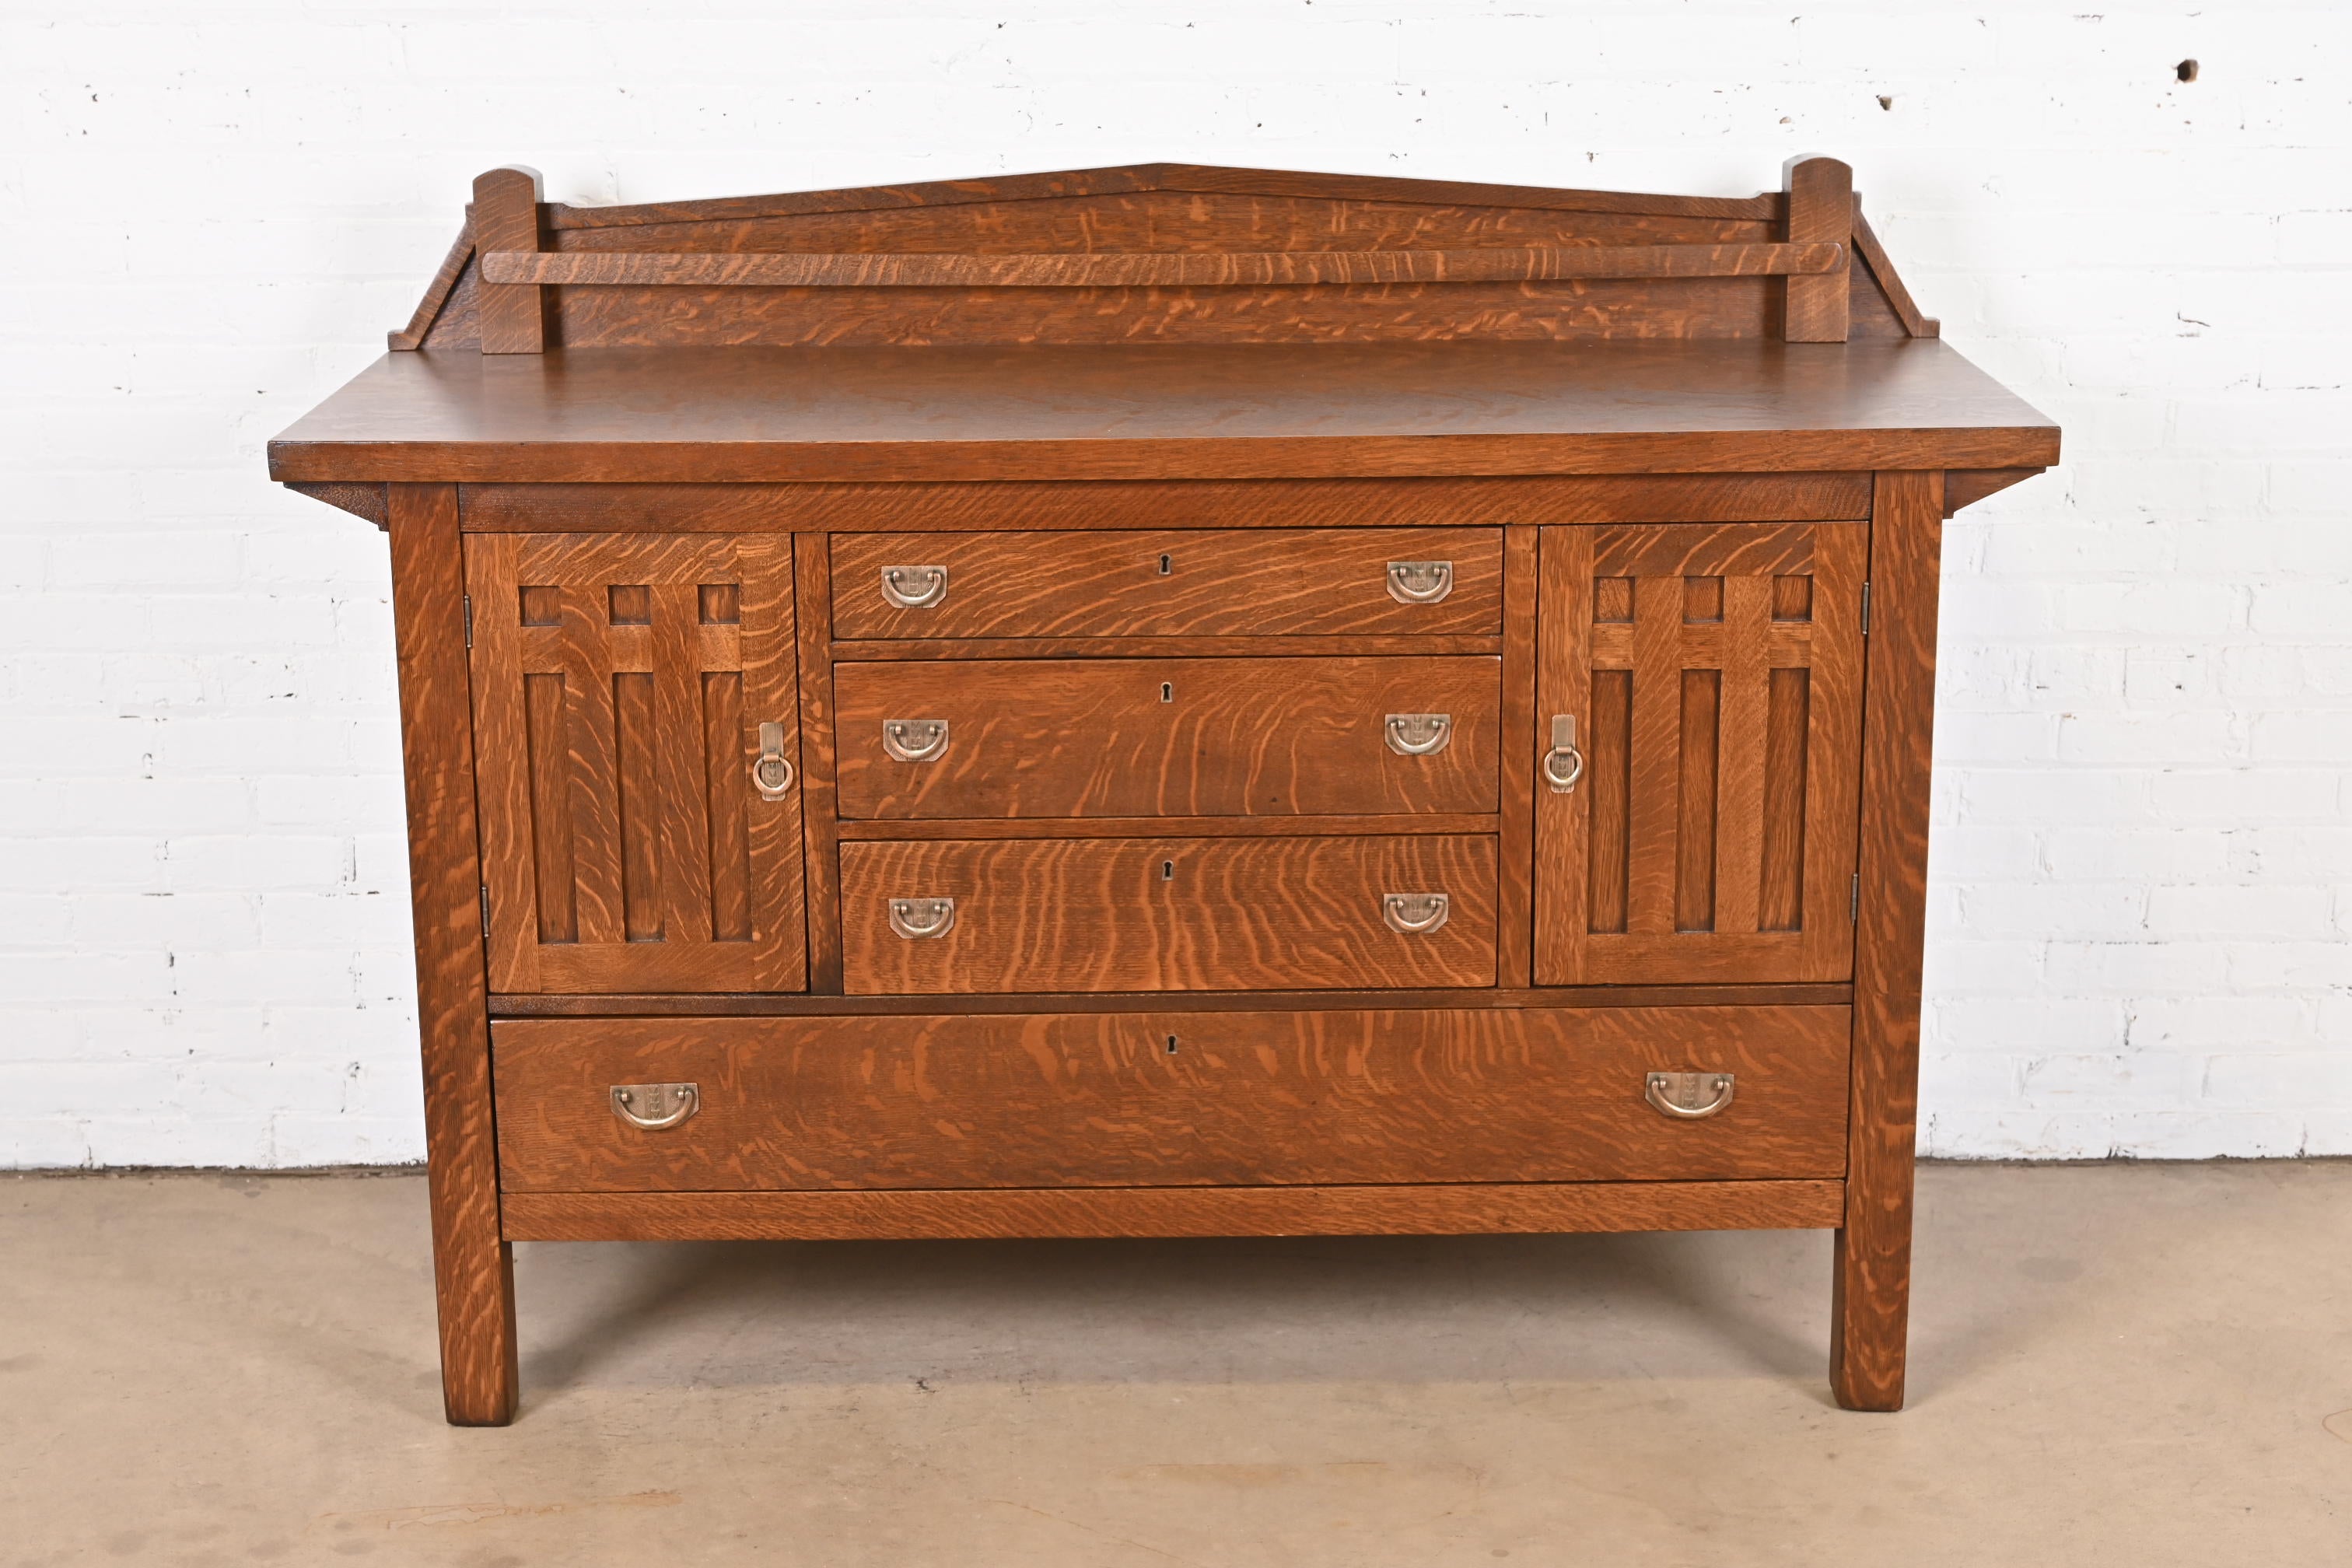 A beautiful antique Mission oak Arts & Crafts sideboard, credenza, or bar cabinet

In the manner of Stickley Brothers

USA, Circa 1900

Quarter sawn oak, with original hammered copper hardware.

Measures: 64